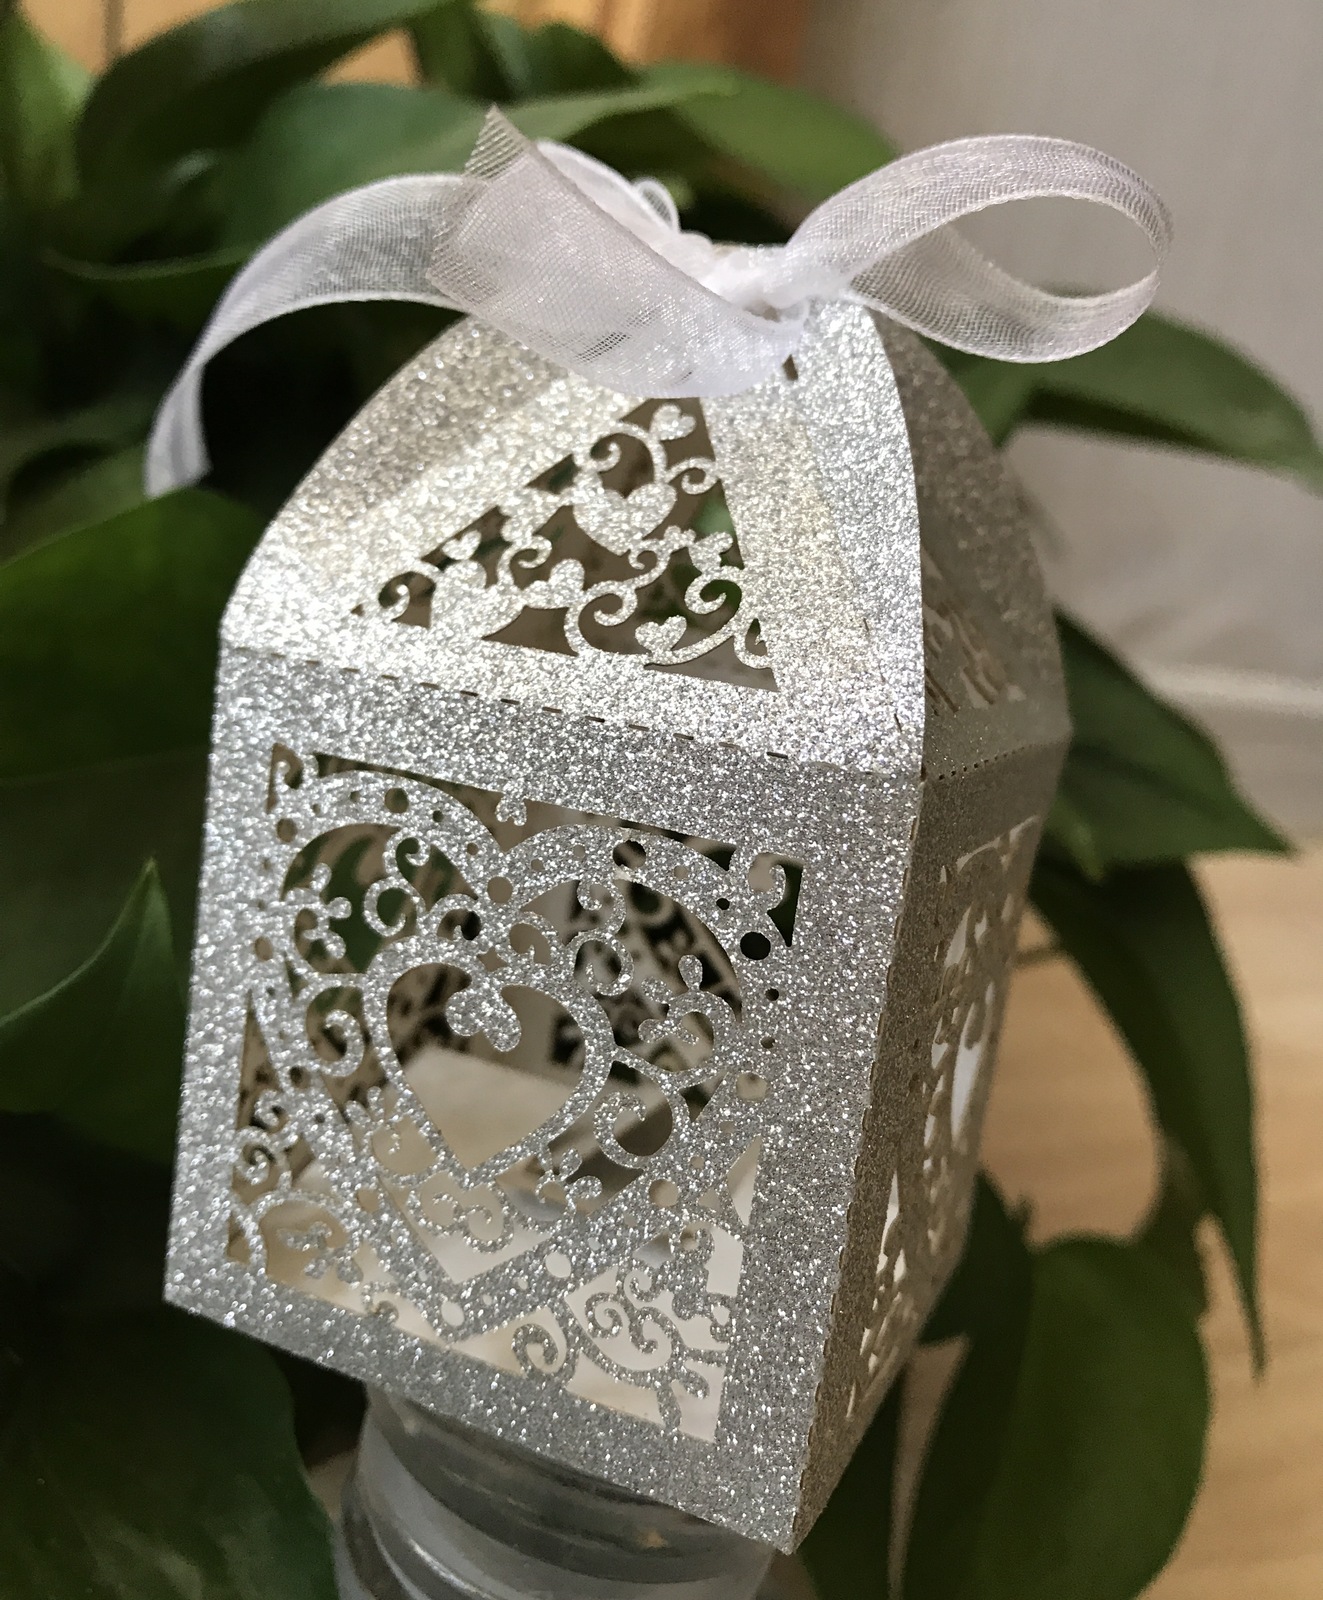 Primary image for 100pcs Glitter Silver Gift Boxes,Chocolate Boxes,Laser Cut wedding favor boxes